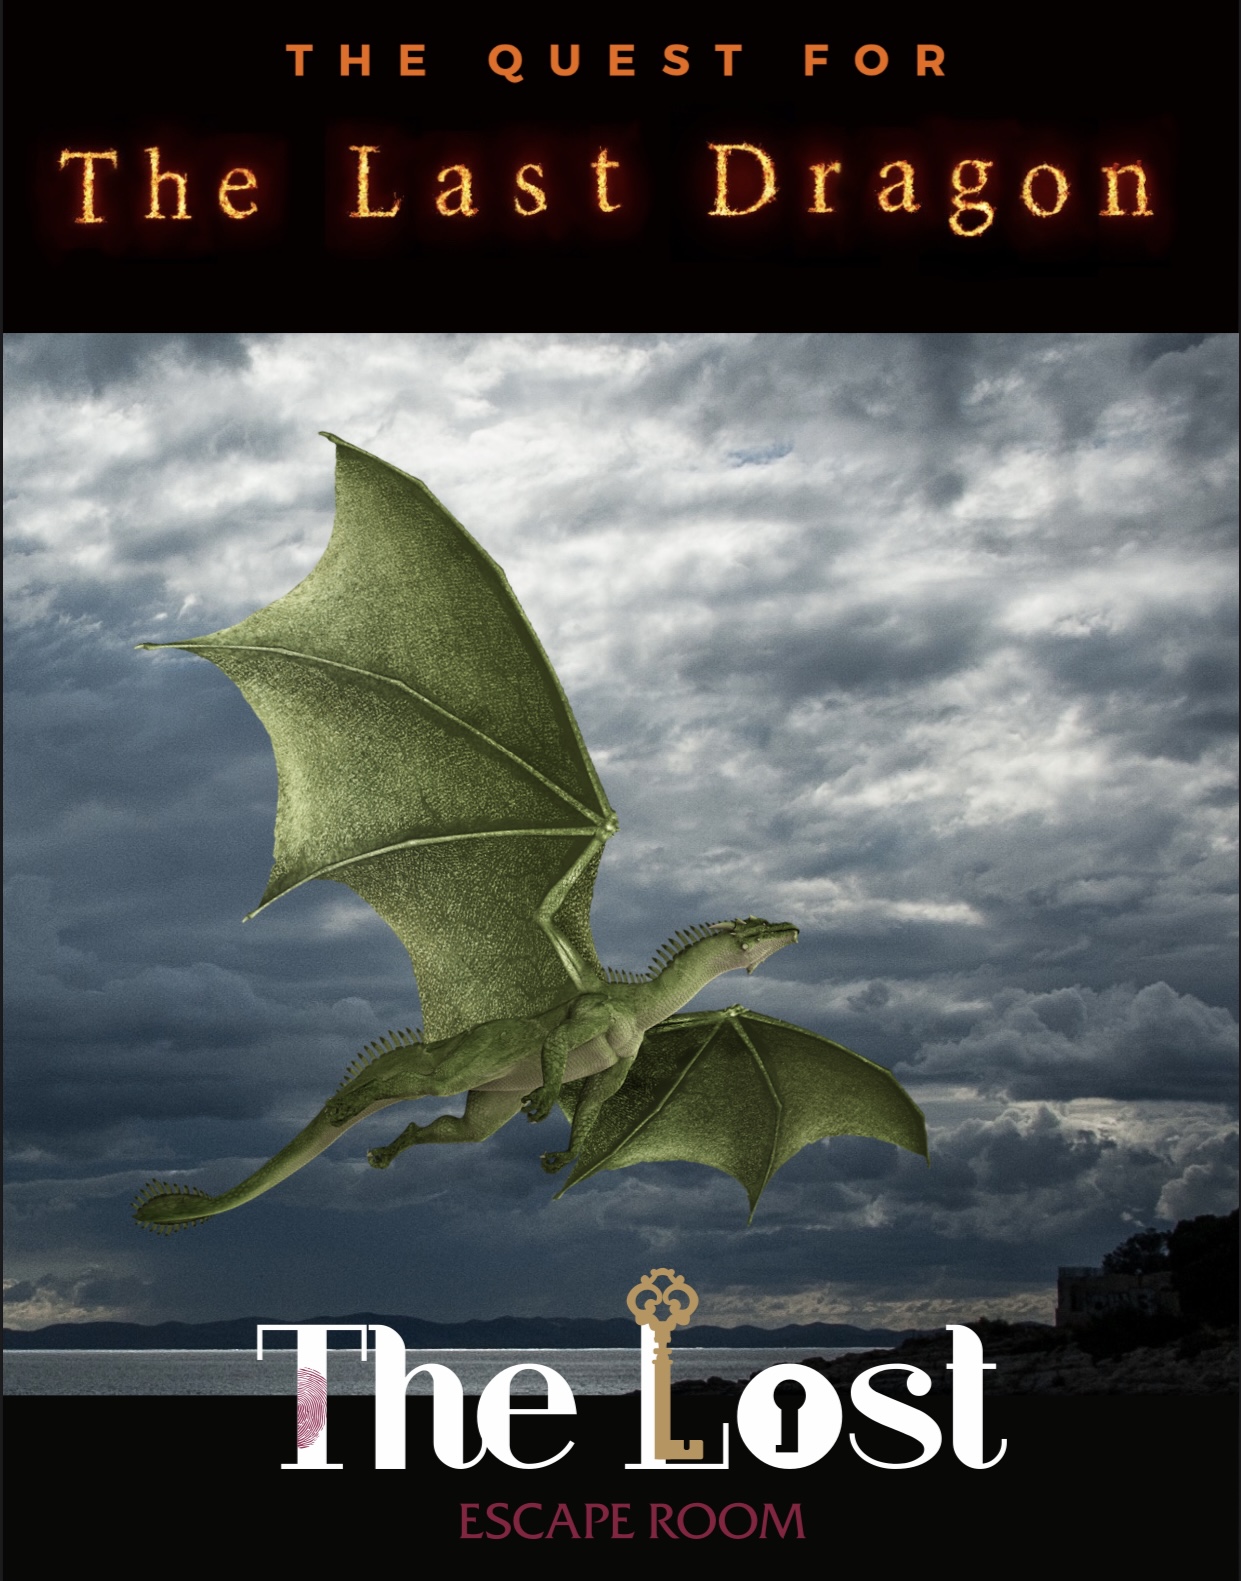 The Quest for the Last Dragon